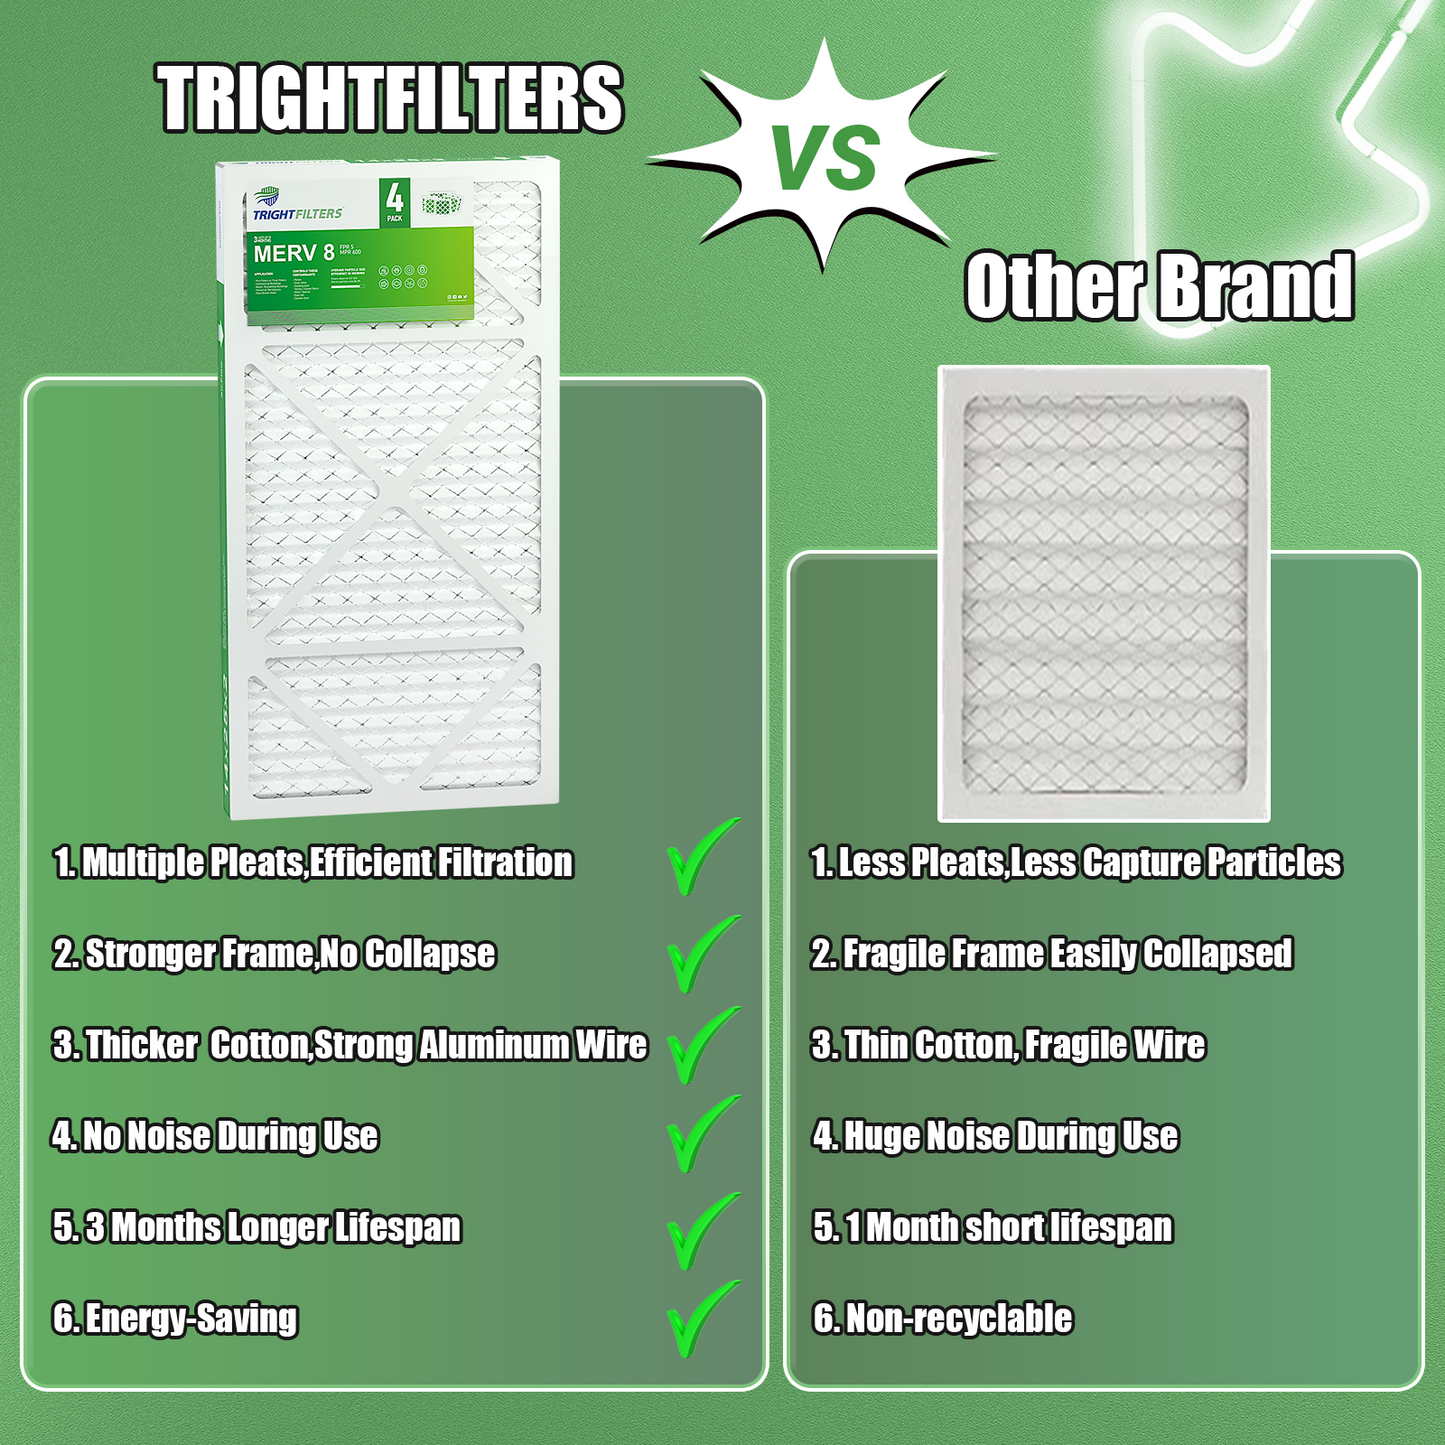 4 Pack of 14x25x2 Air Filter